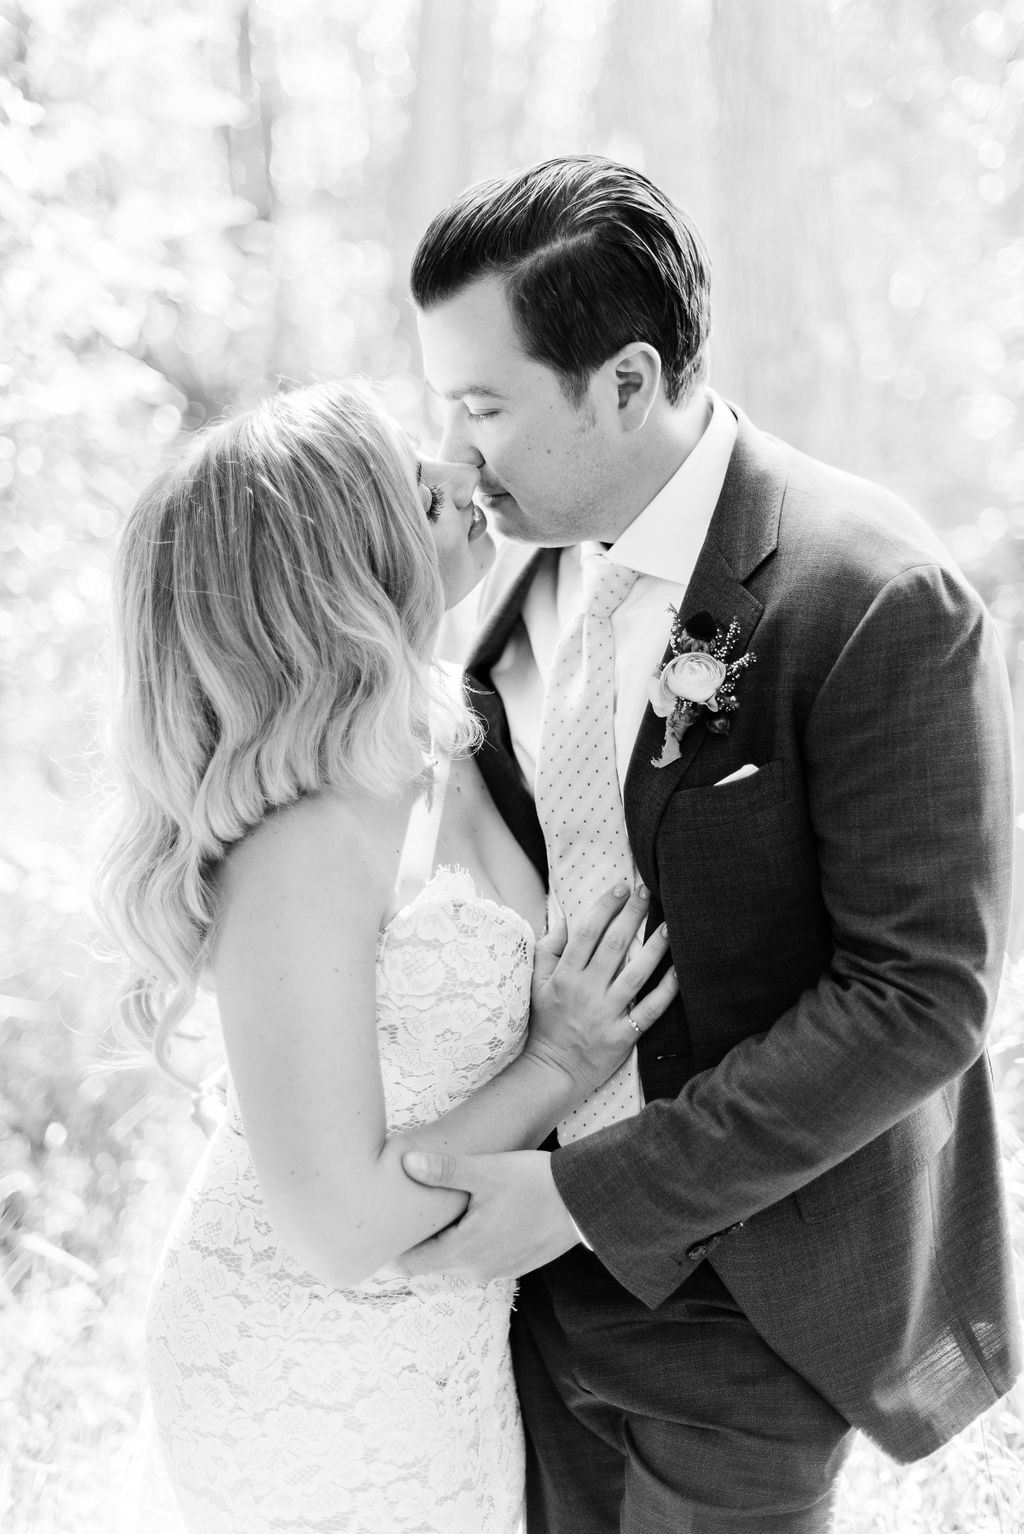 Romantic black and white portrait of a Calgary bride and groom